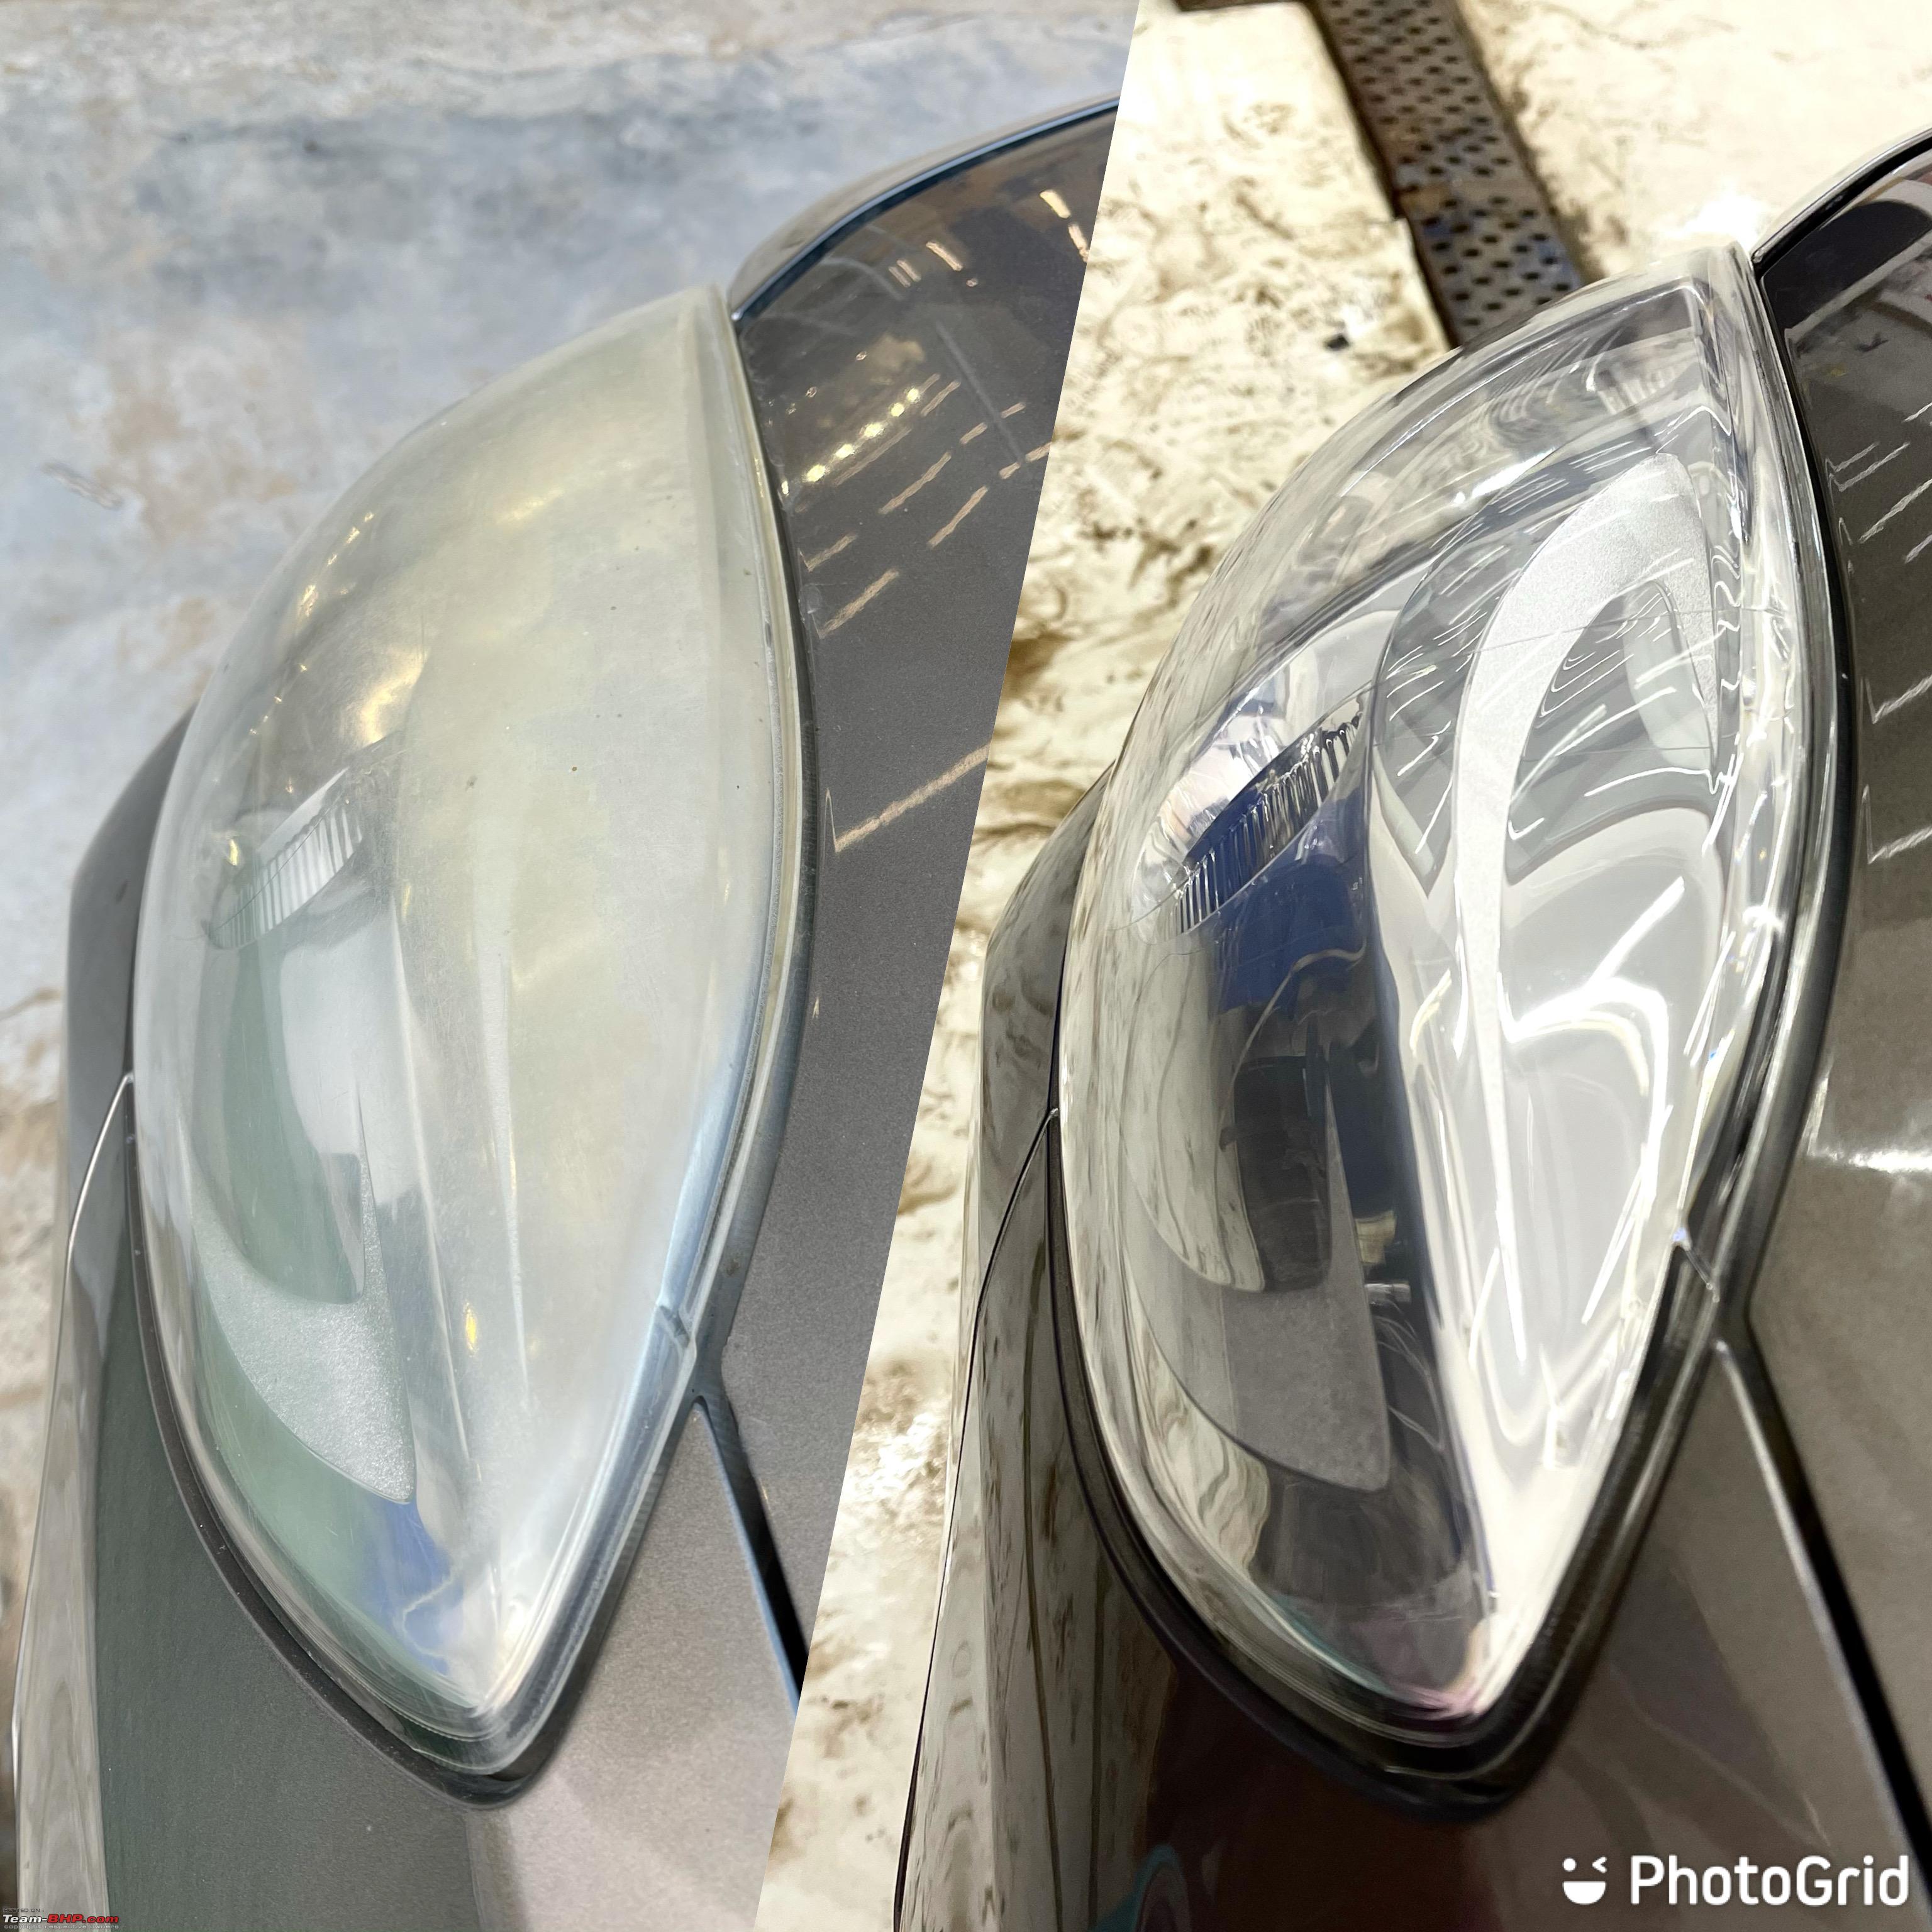 Headlight smearing after using headlight cleaner.